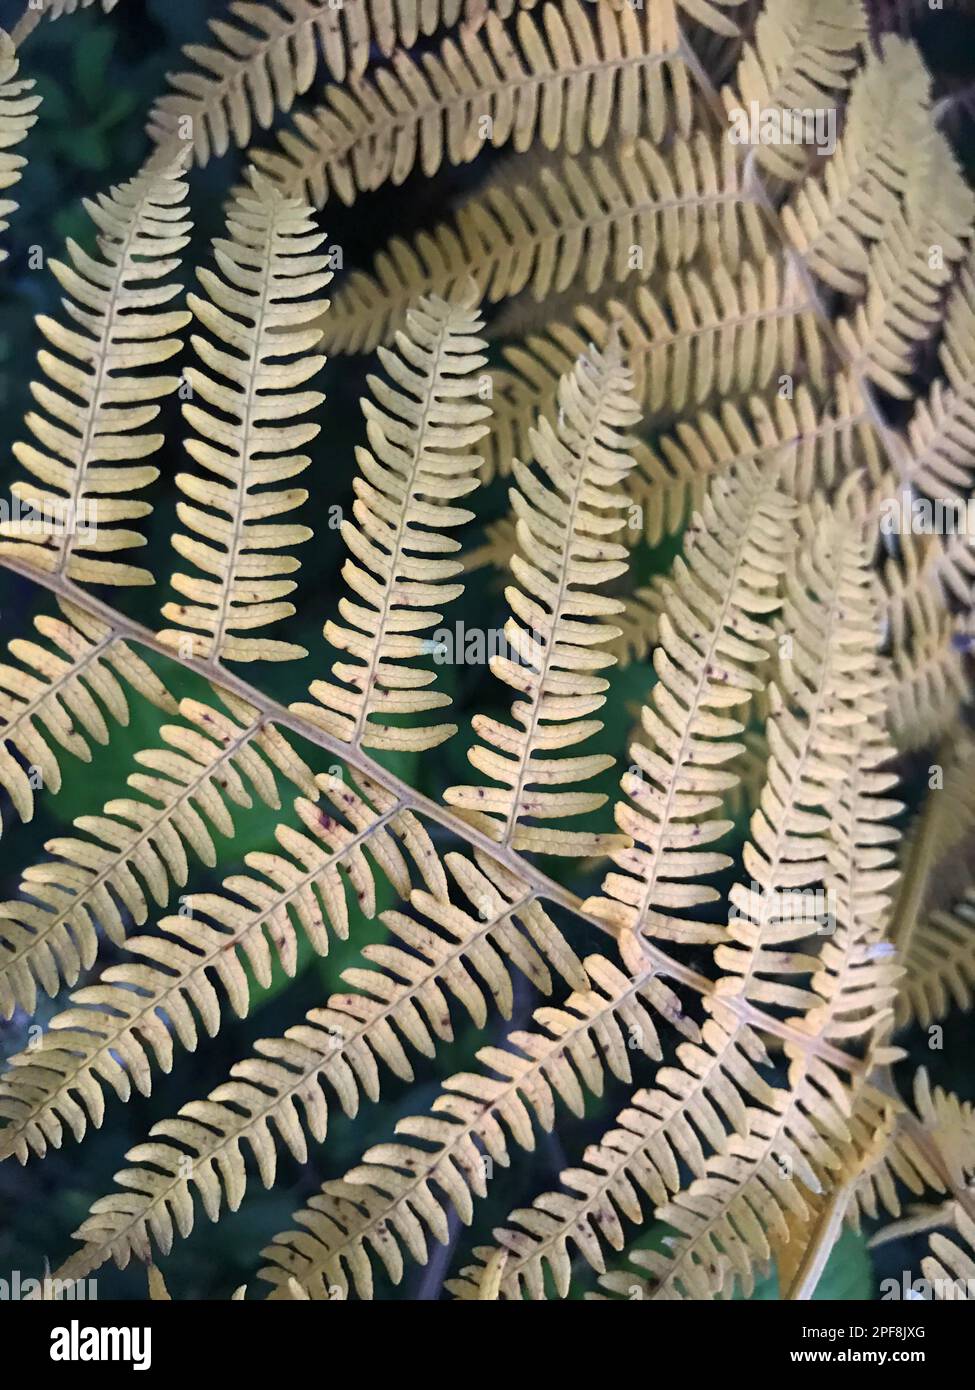 Fern seed or Pterophyta (Turkish: Egrelti otu) in the nature. Stock Photo